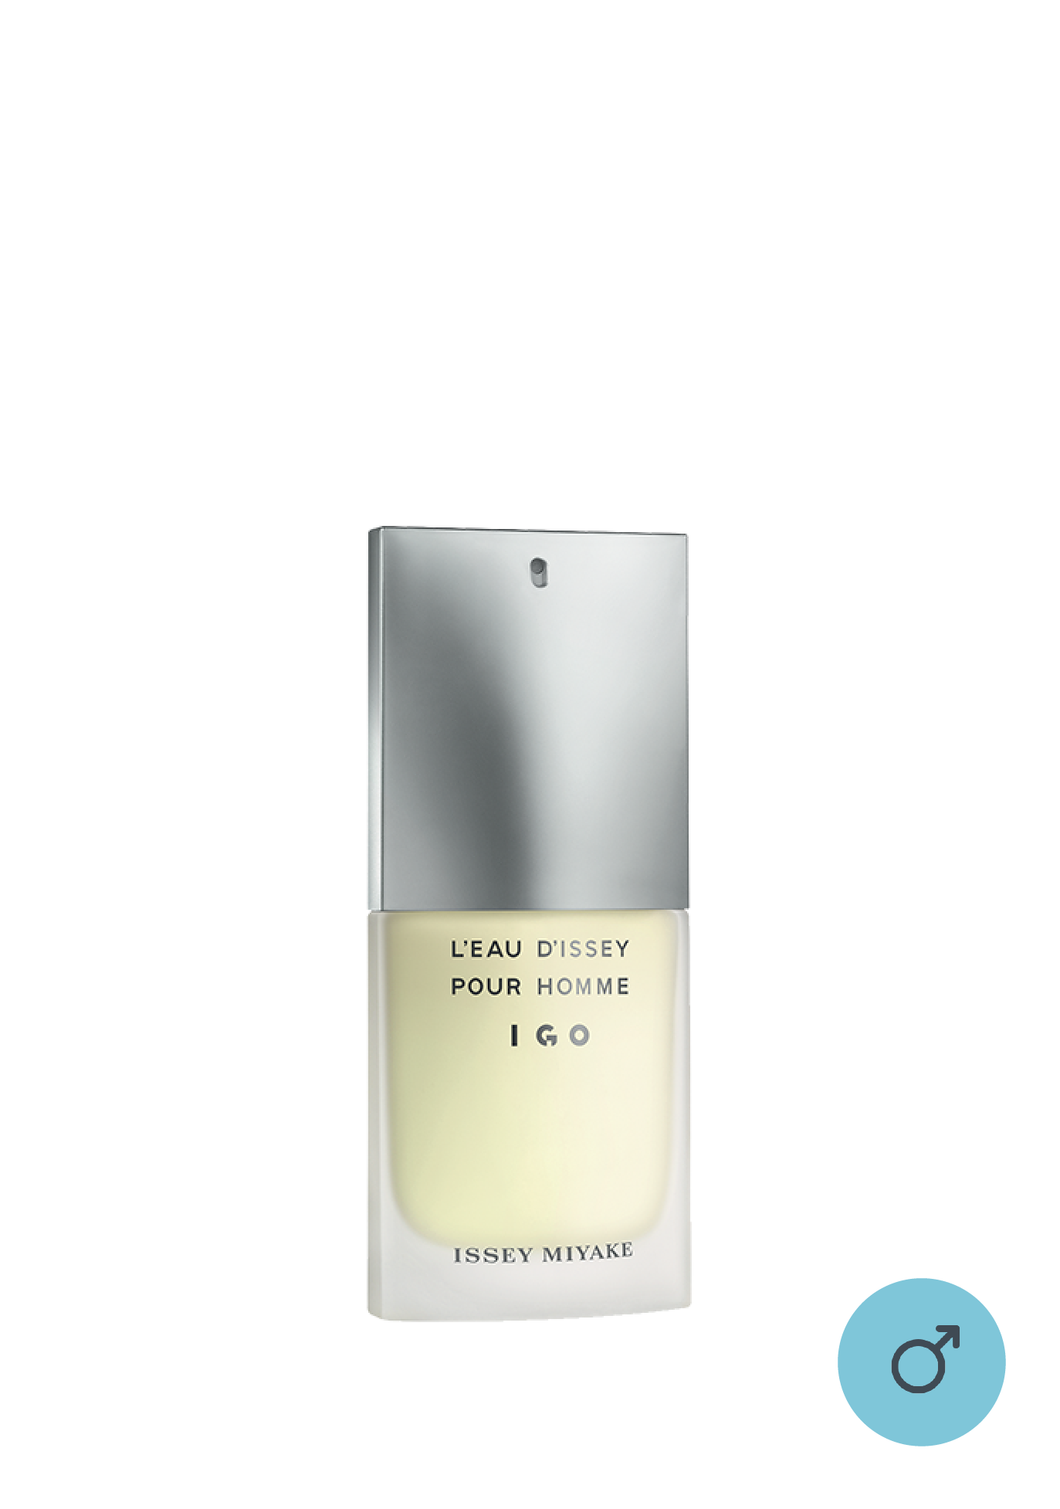 Issey Miyake L'eau D'issey Pour Homme IGO EDT